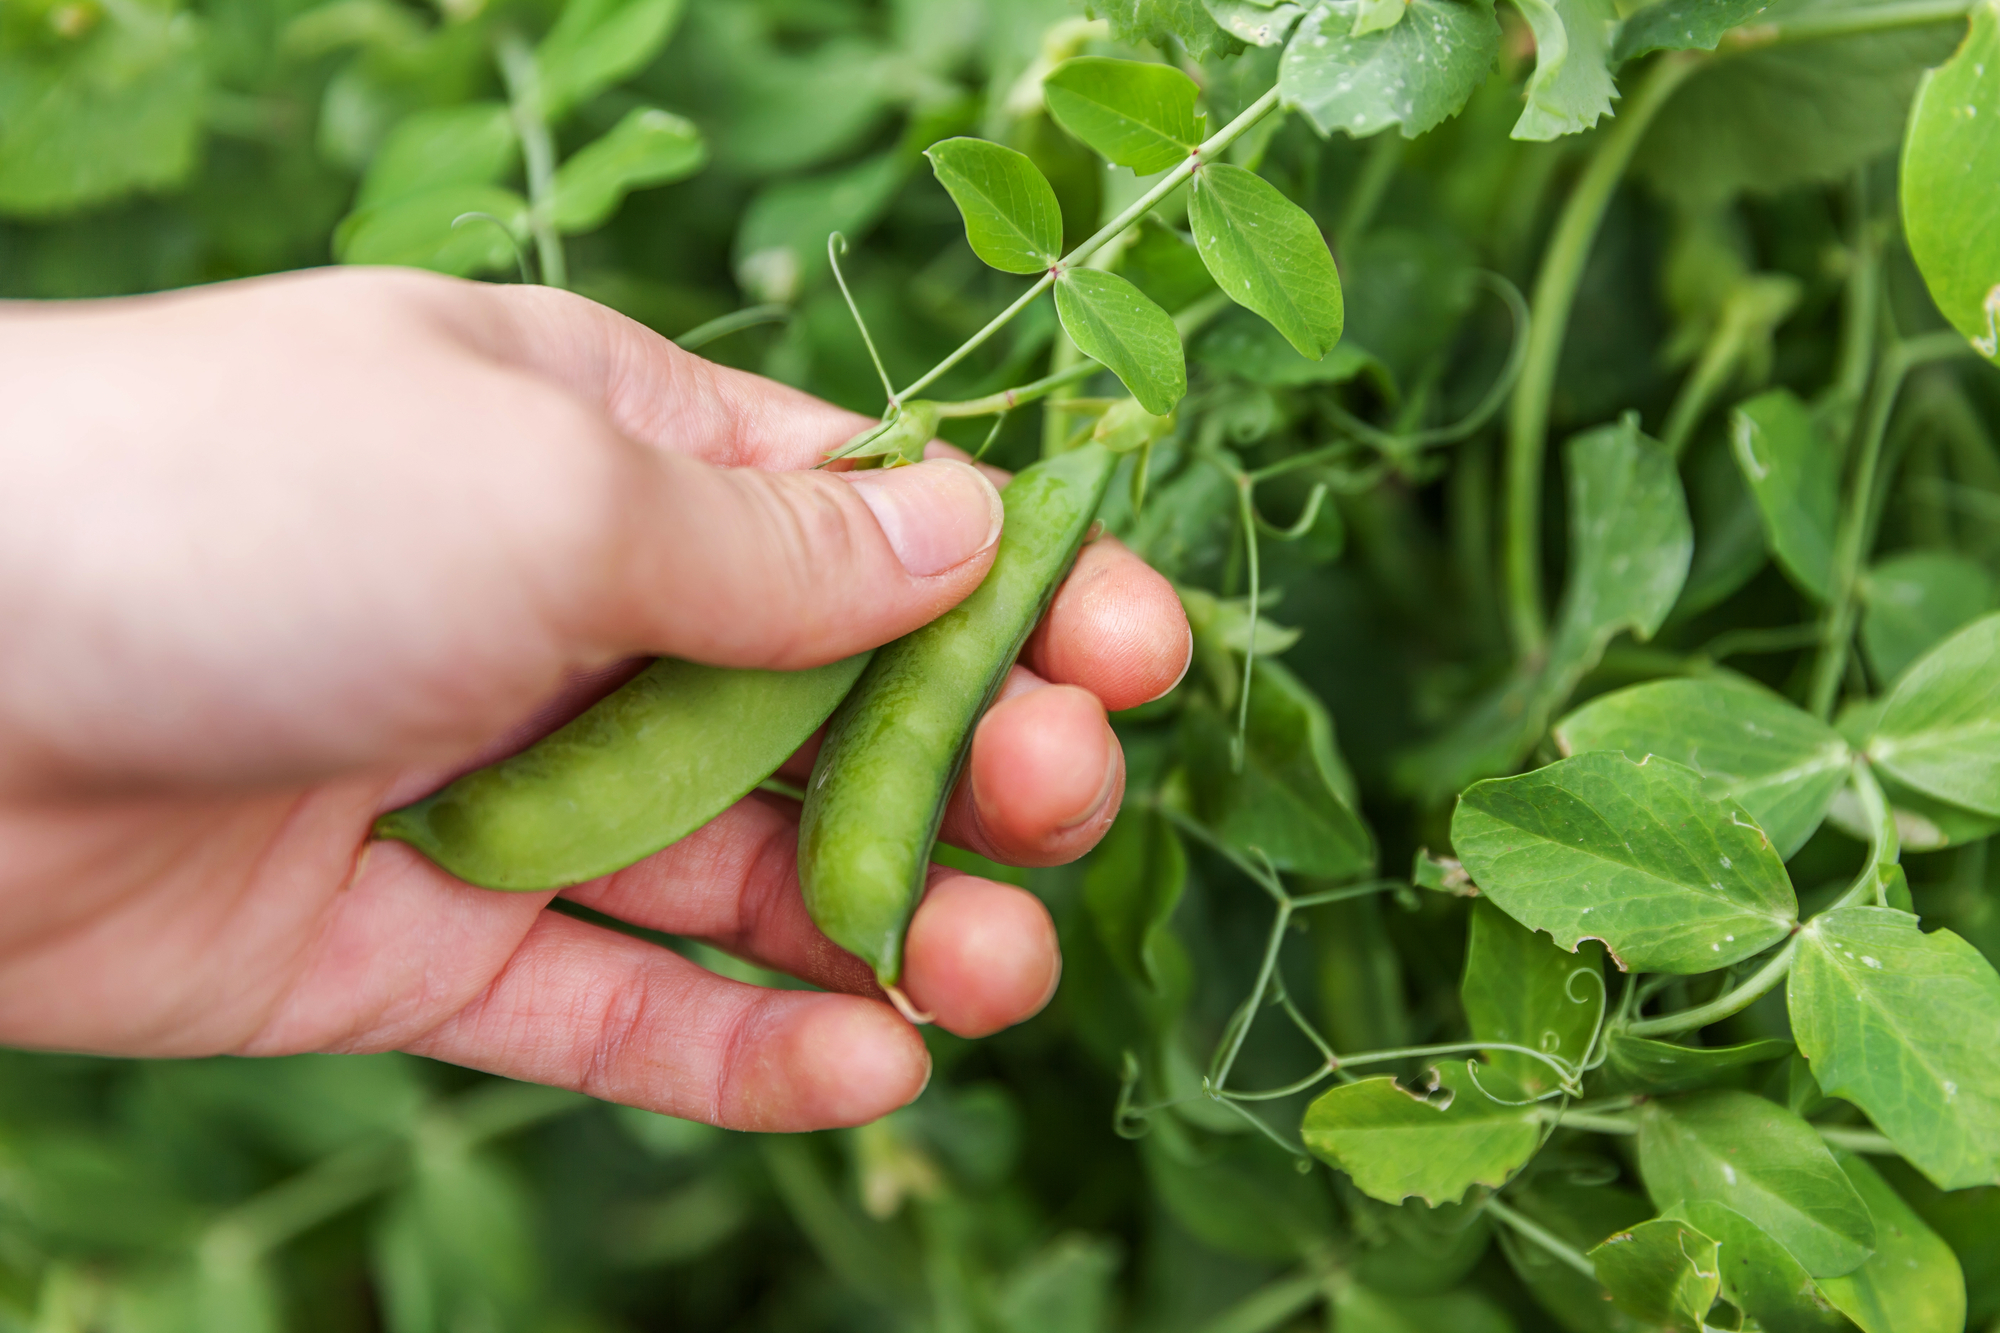 Gardening And Agriculture Concept. Female Farm Worker Hand Harvesting Green Fresh Ripe Organic Peas On Branch In Garden. Vegan Vegetarian Home Grown Food Production. Woman Picking Pea Pods.